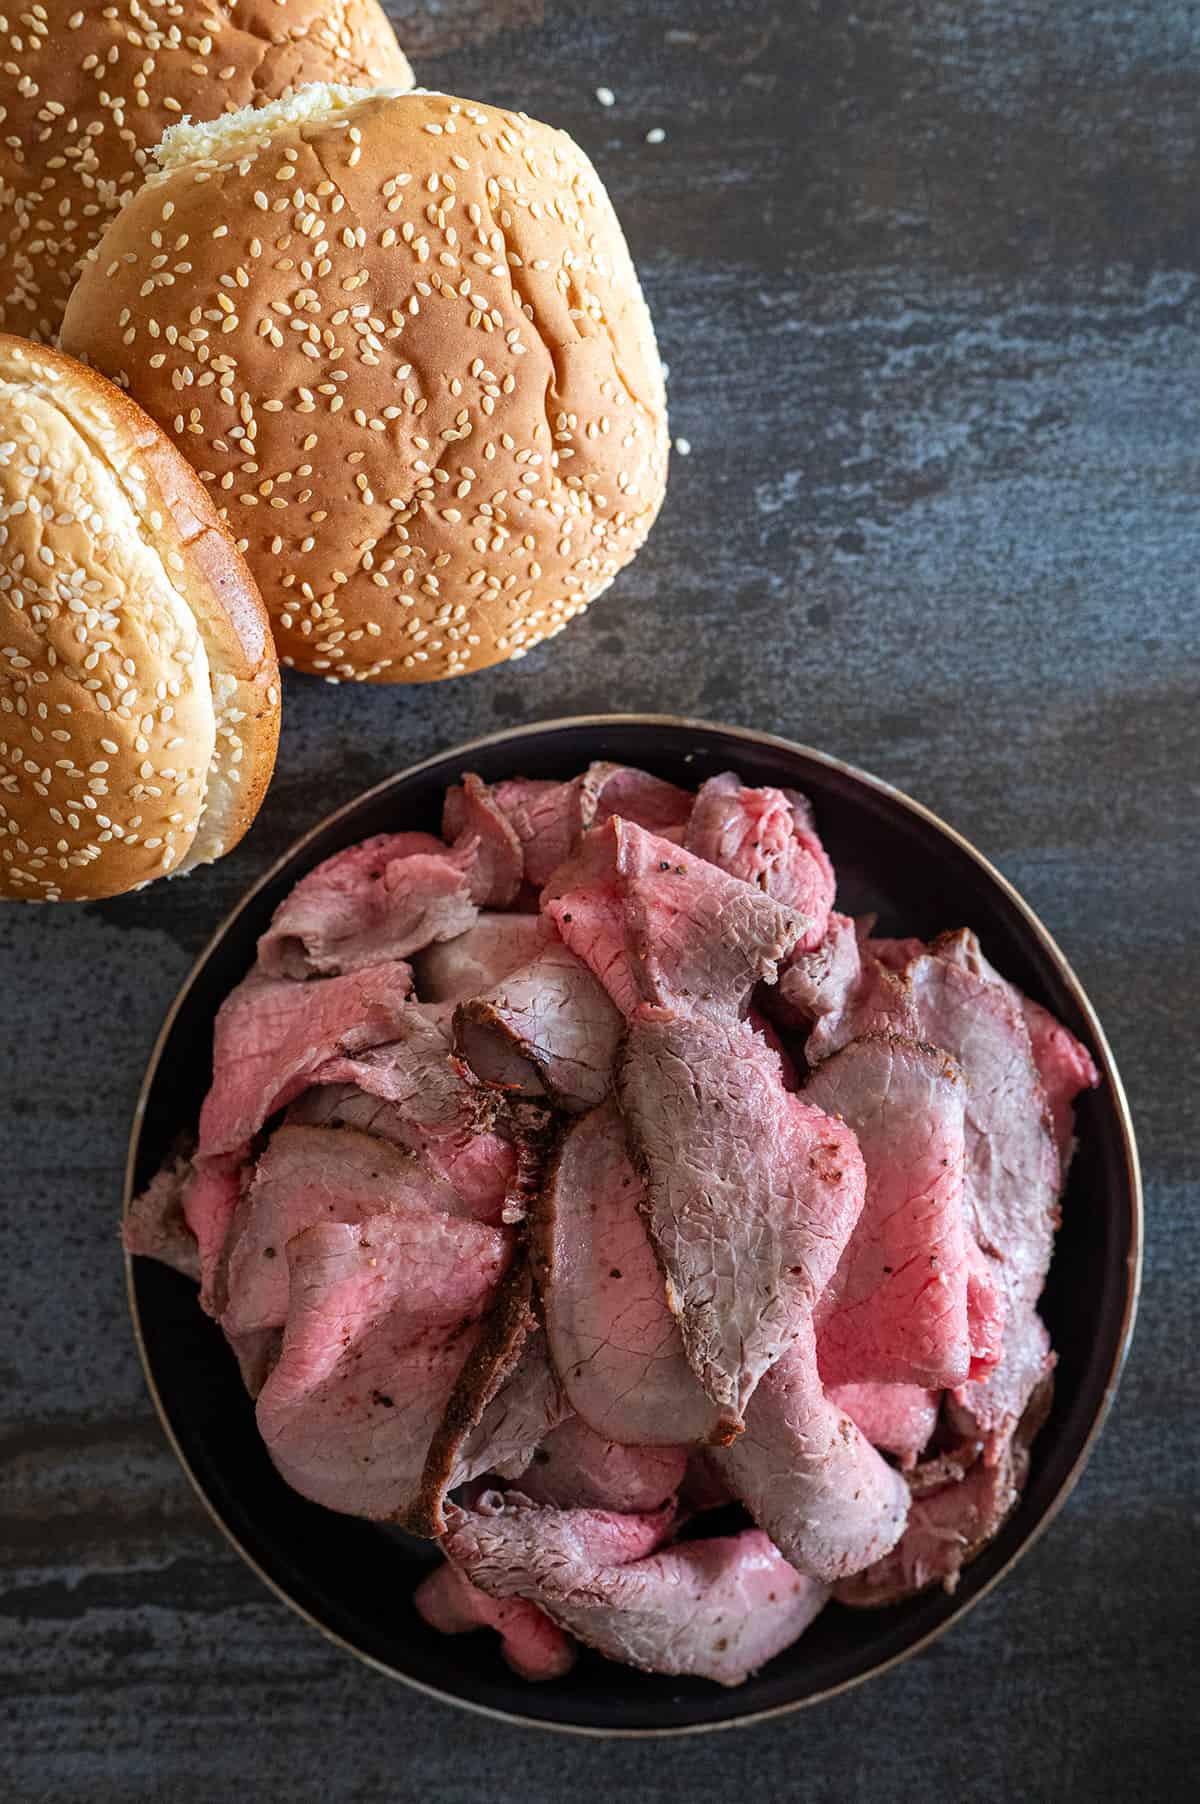 Plate of sliced roast beef next to sesame seed buns.